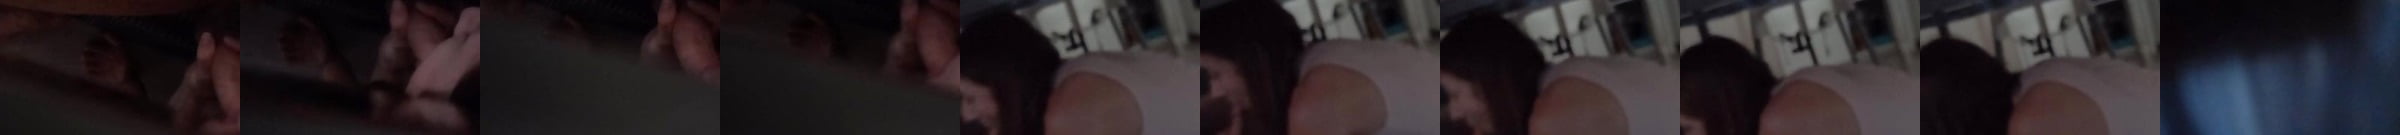 Blowjob Under Table Video Porno xHamster photo